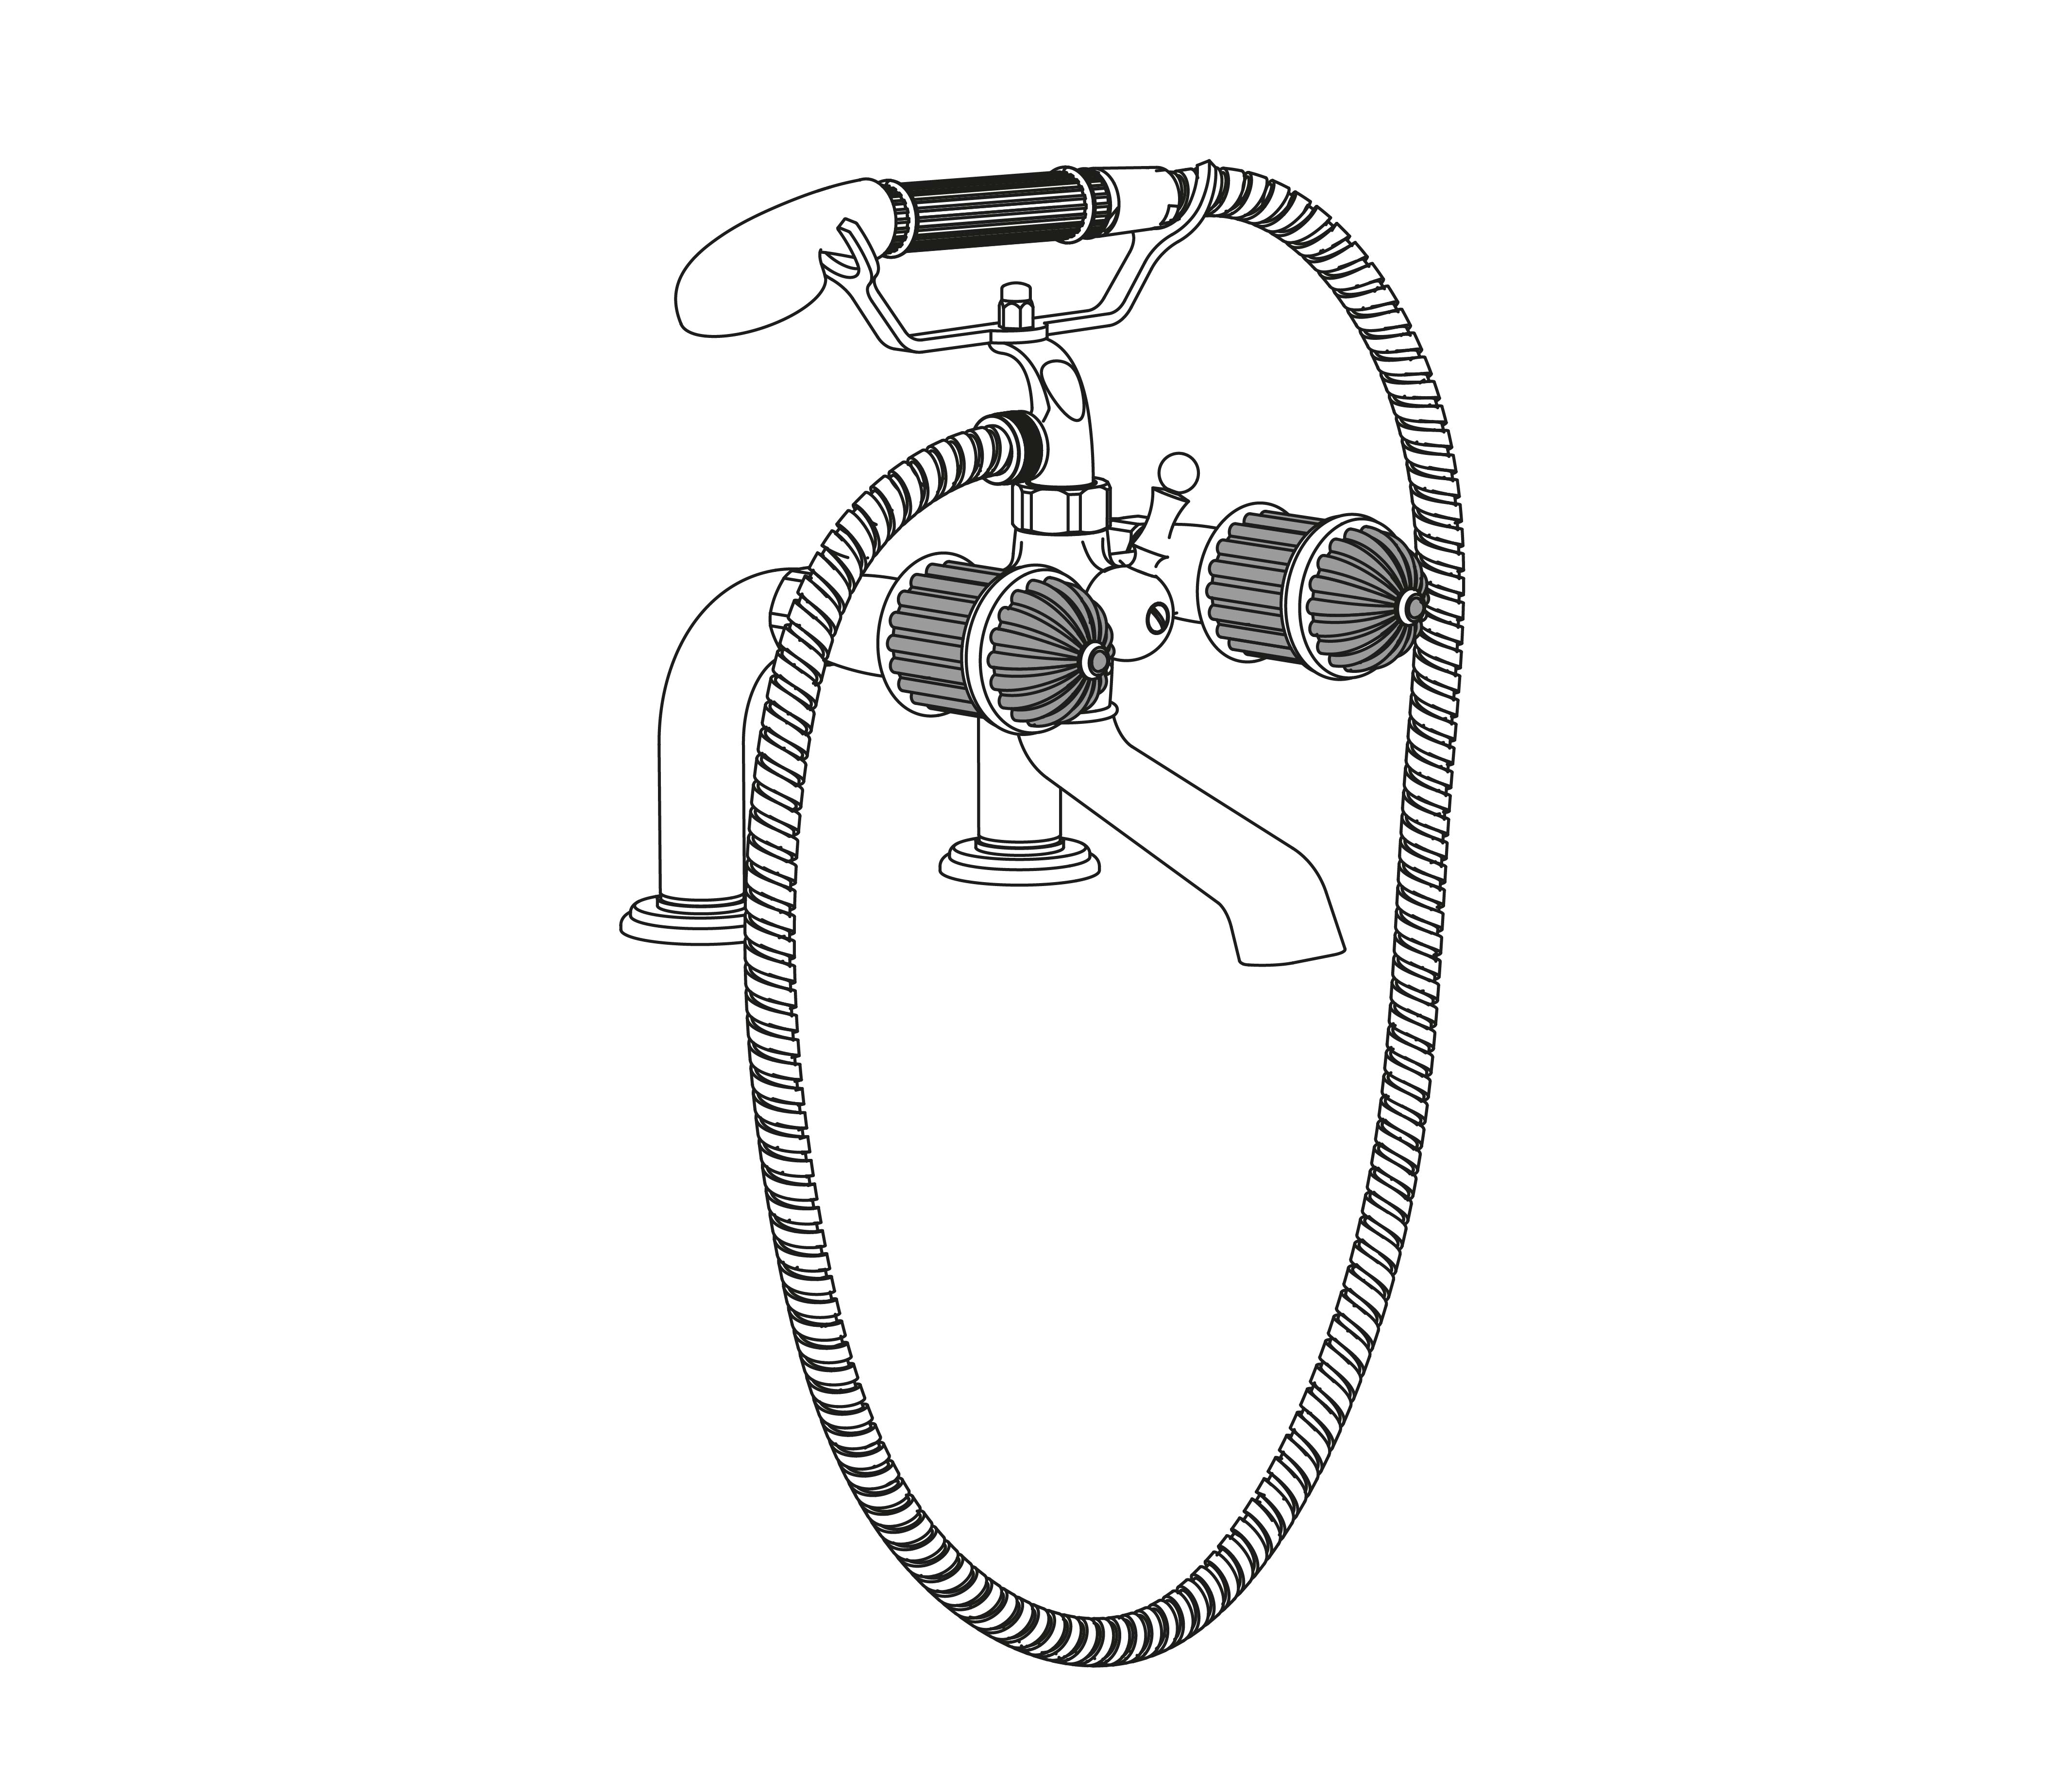 S189-3306 Rim mounted bath and shower mixer